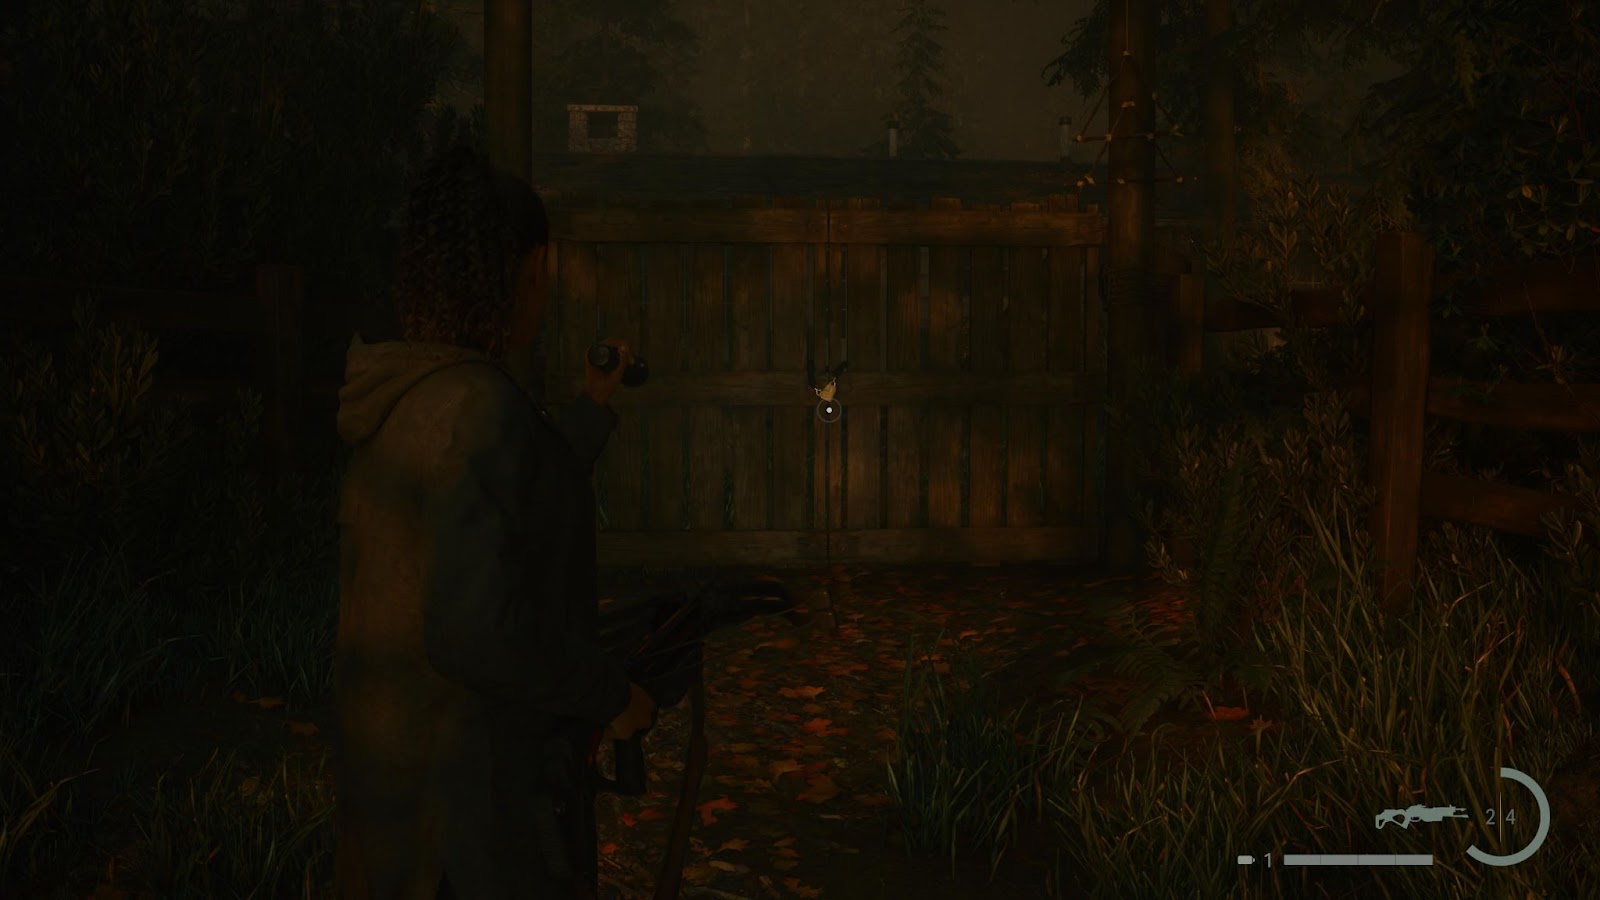 An in game screenshot of the locked gate to the rental cabins area in Cauldron Lake from Alan Wake 2